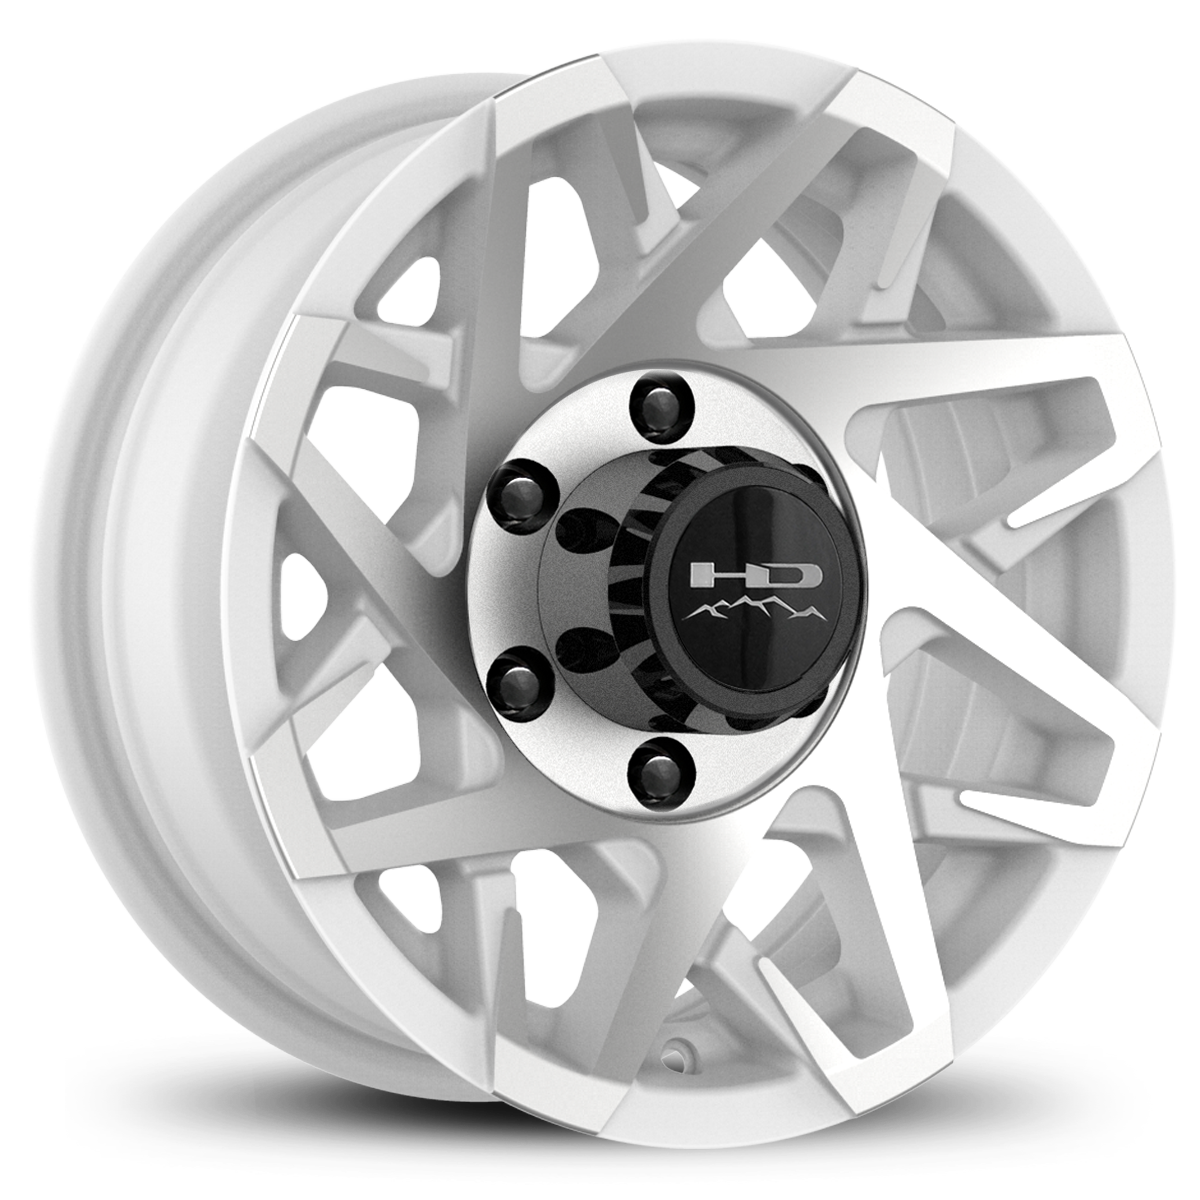 HD Off-Road Canyon Custom Trailer Wheel Rims in 16x6.0 16x6 Gloss White Machined Face with Center Cap & Logo fits 6x139.7 / 6x5.50 Axle Boat, Car, RV, Travel, Concession, Horse, Utility, Lawn & Garden, & Landscaping.